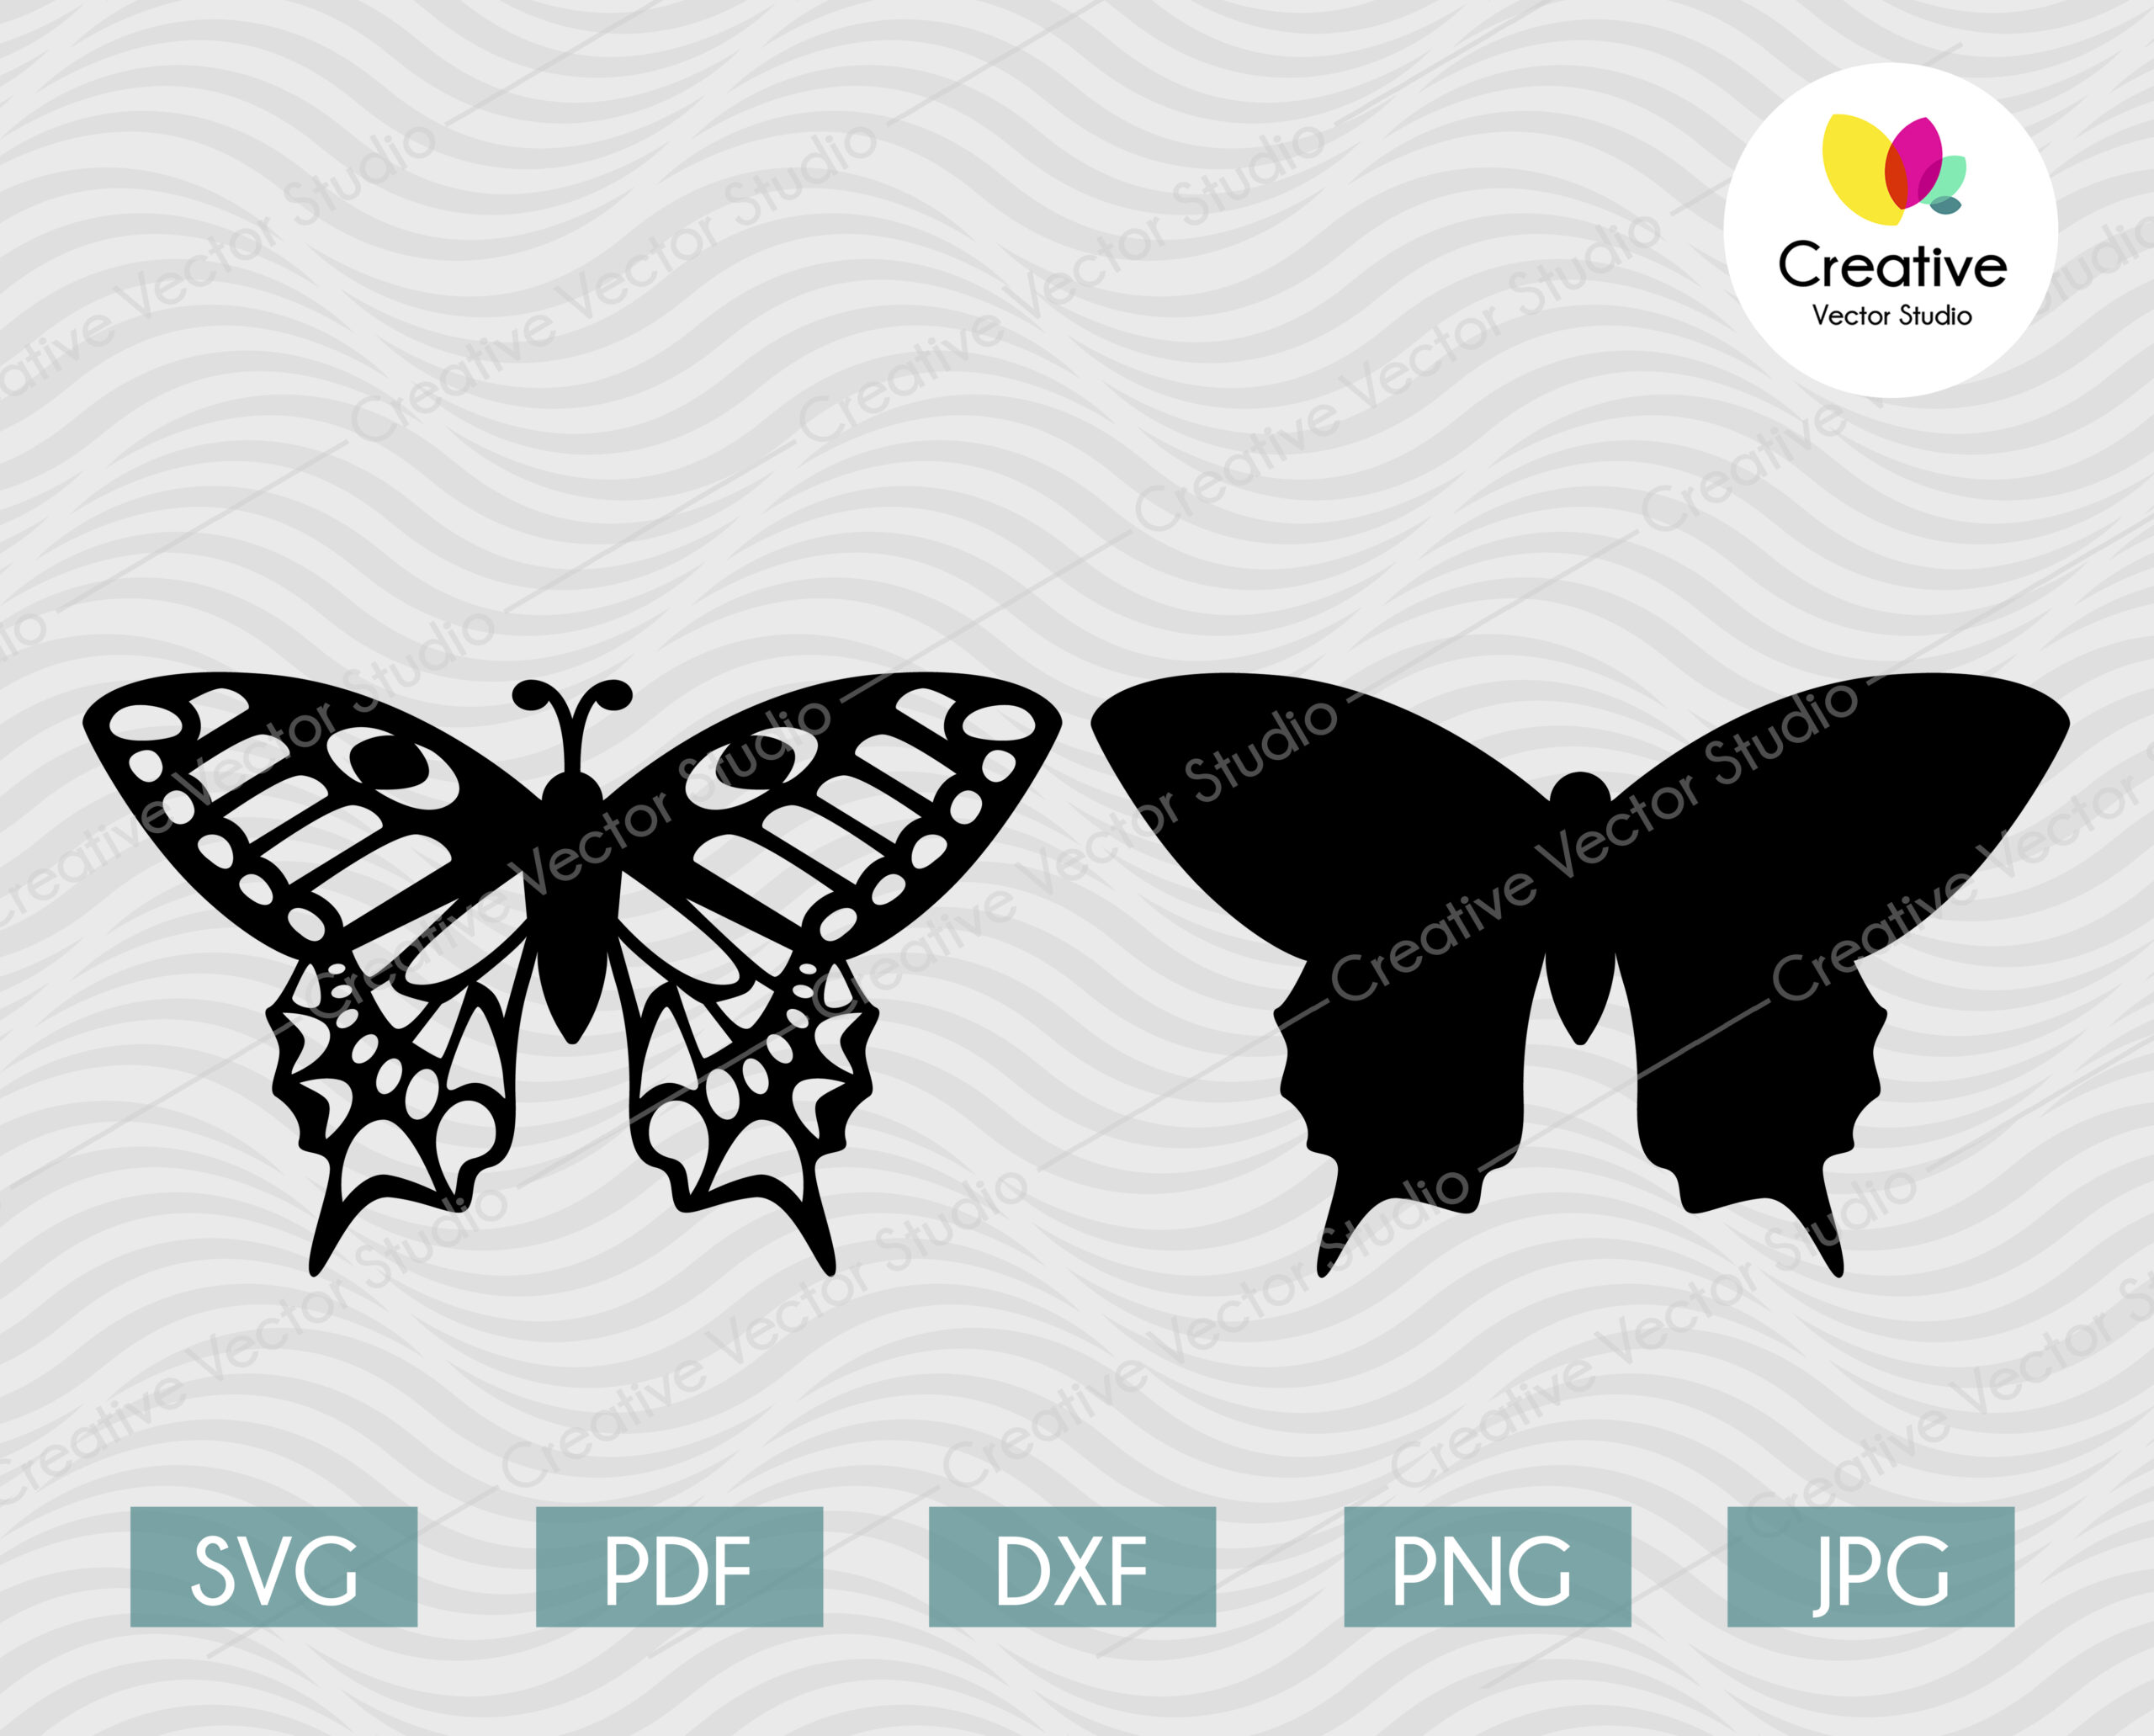 Download Clip Art Butterfly Svg 3d Butterfly Svg Layered Butterfly Svg Cut Files For Cricut Silhouette Commercial Use Butterflies Svg Dxf Butterfly Clipart Art Collectibles